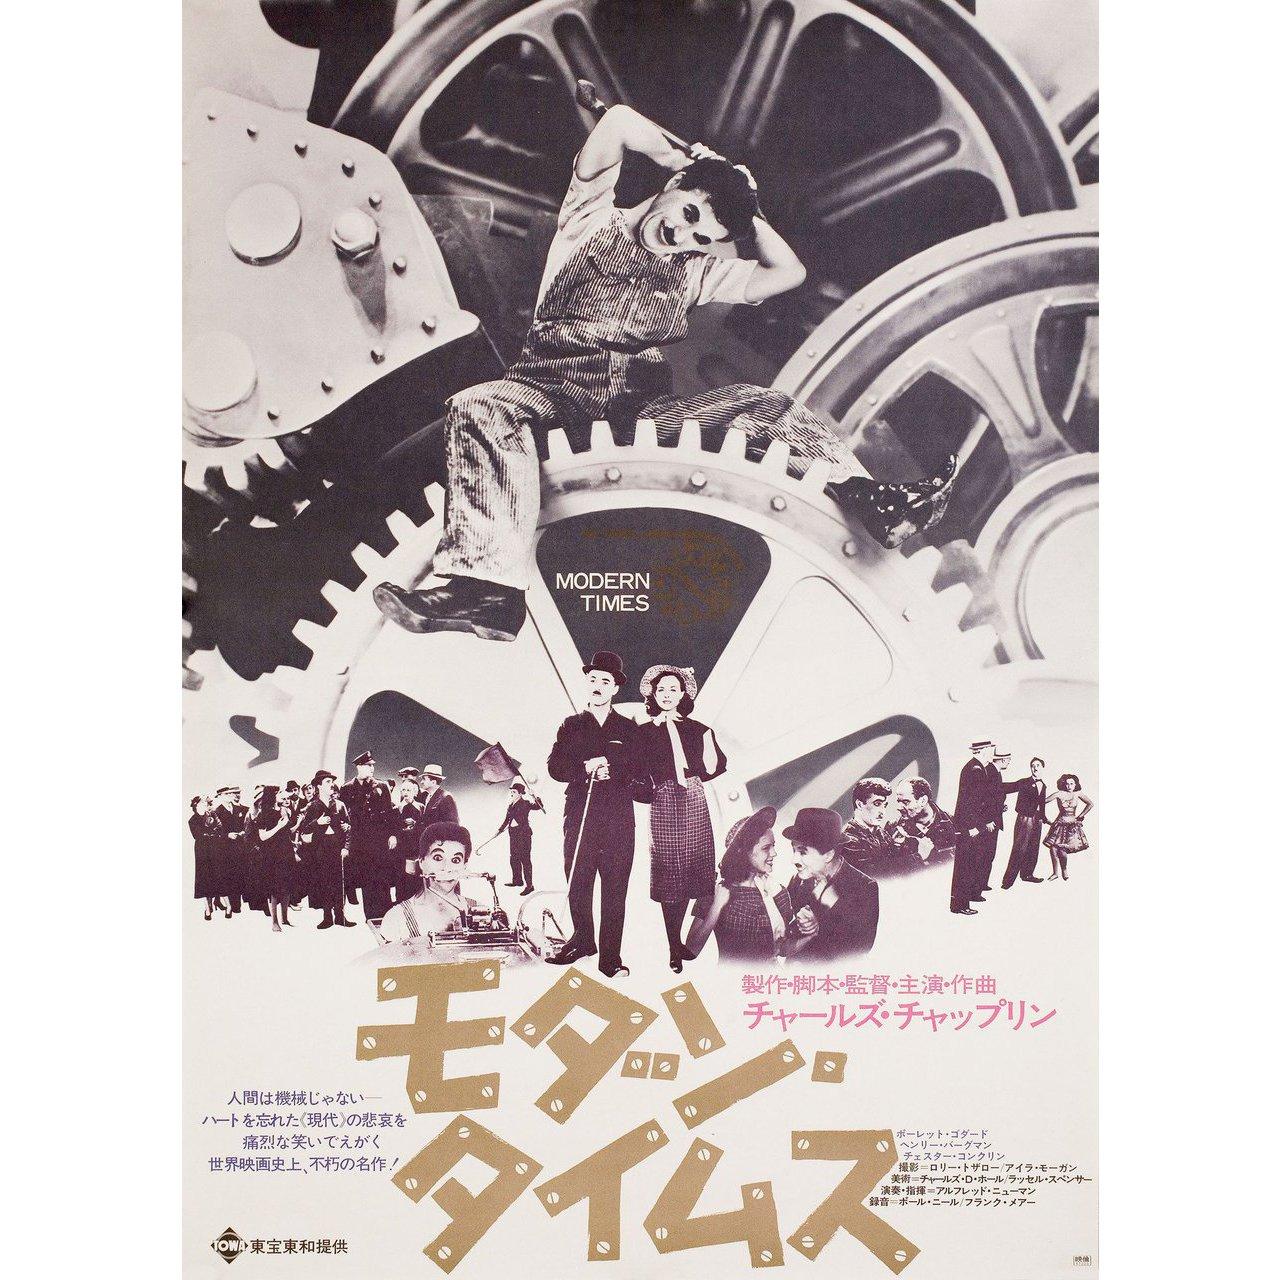 Original 1972 re-release Japanese B2 poster for the 1936 film Modern Times directed by Charles Chaplin with Charles Chaplin / Paulette Goddard / Henry Bergman / Tiny Sandford. Fine condition, rolled. Please note: the size is stated in inches and the